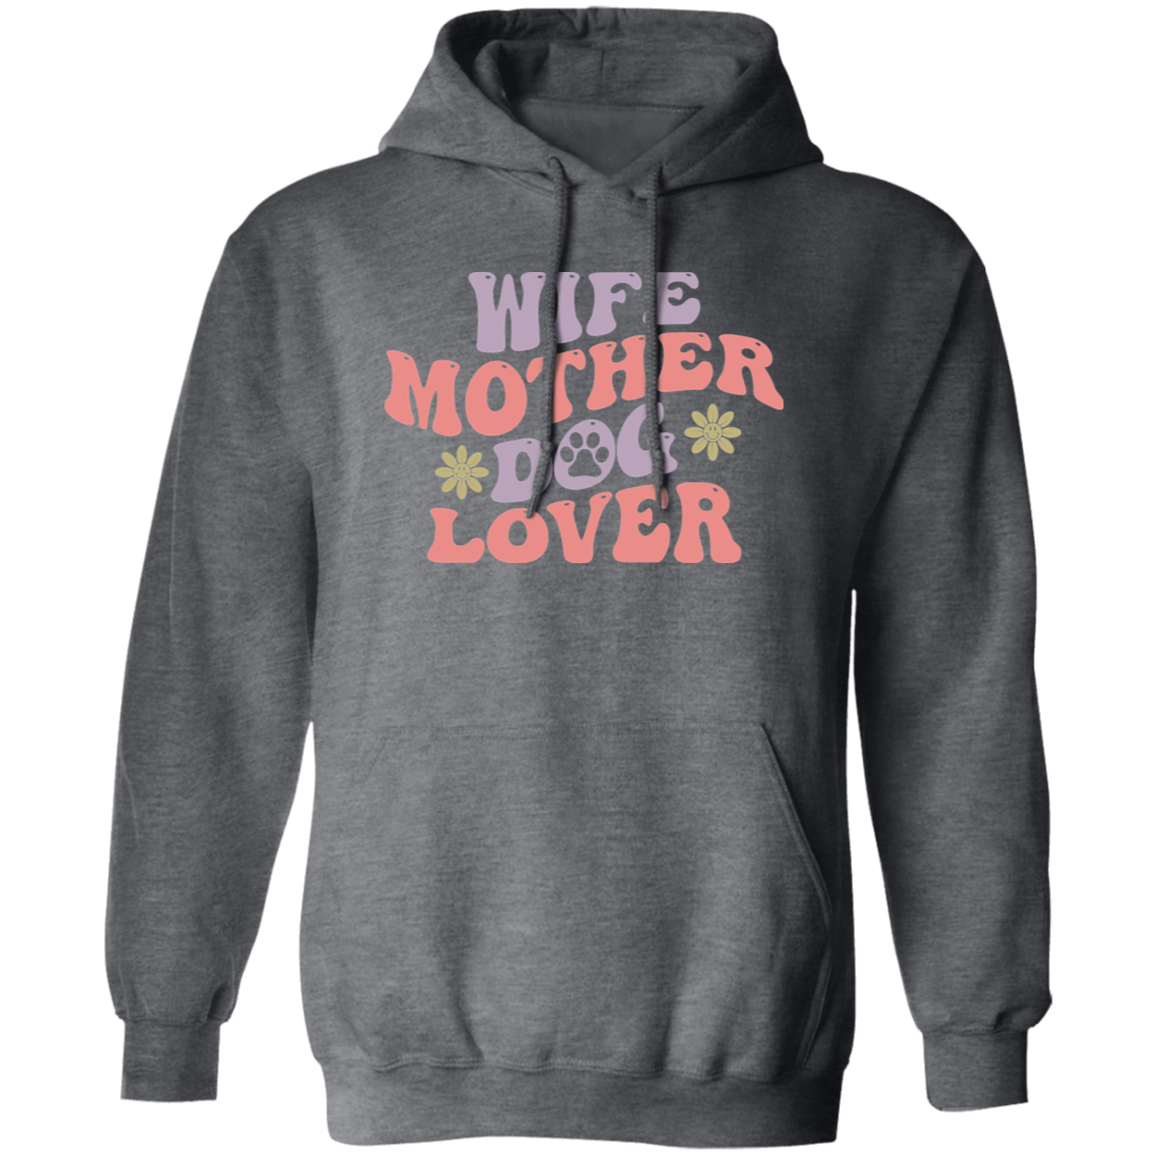 Wife Mother Dog Lover Rescue Mom Pullover Hoodie Hooded Sweatshirt